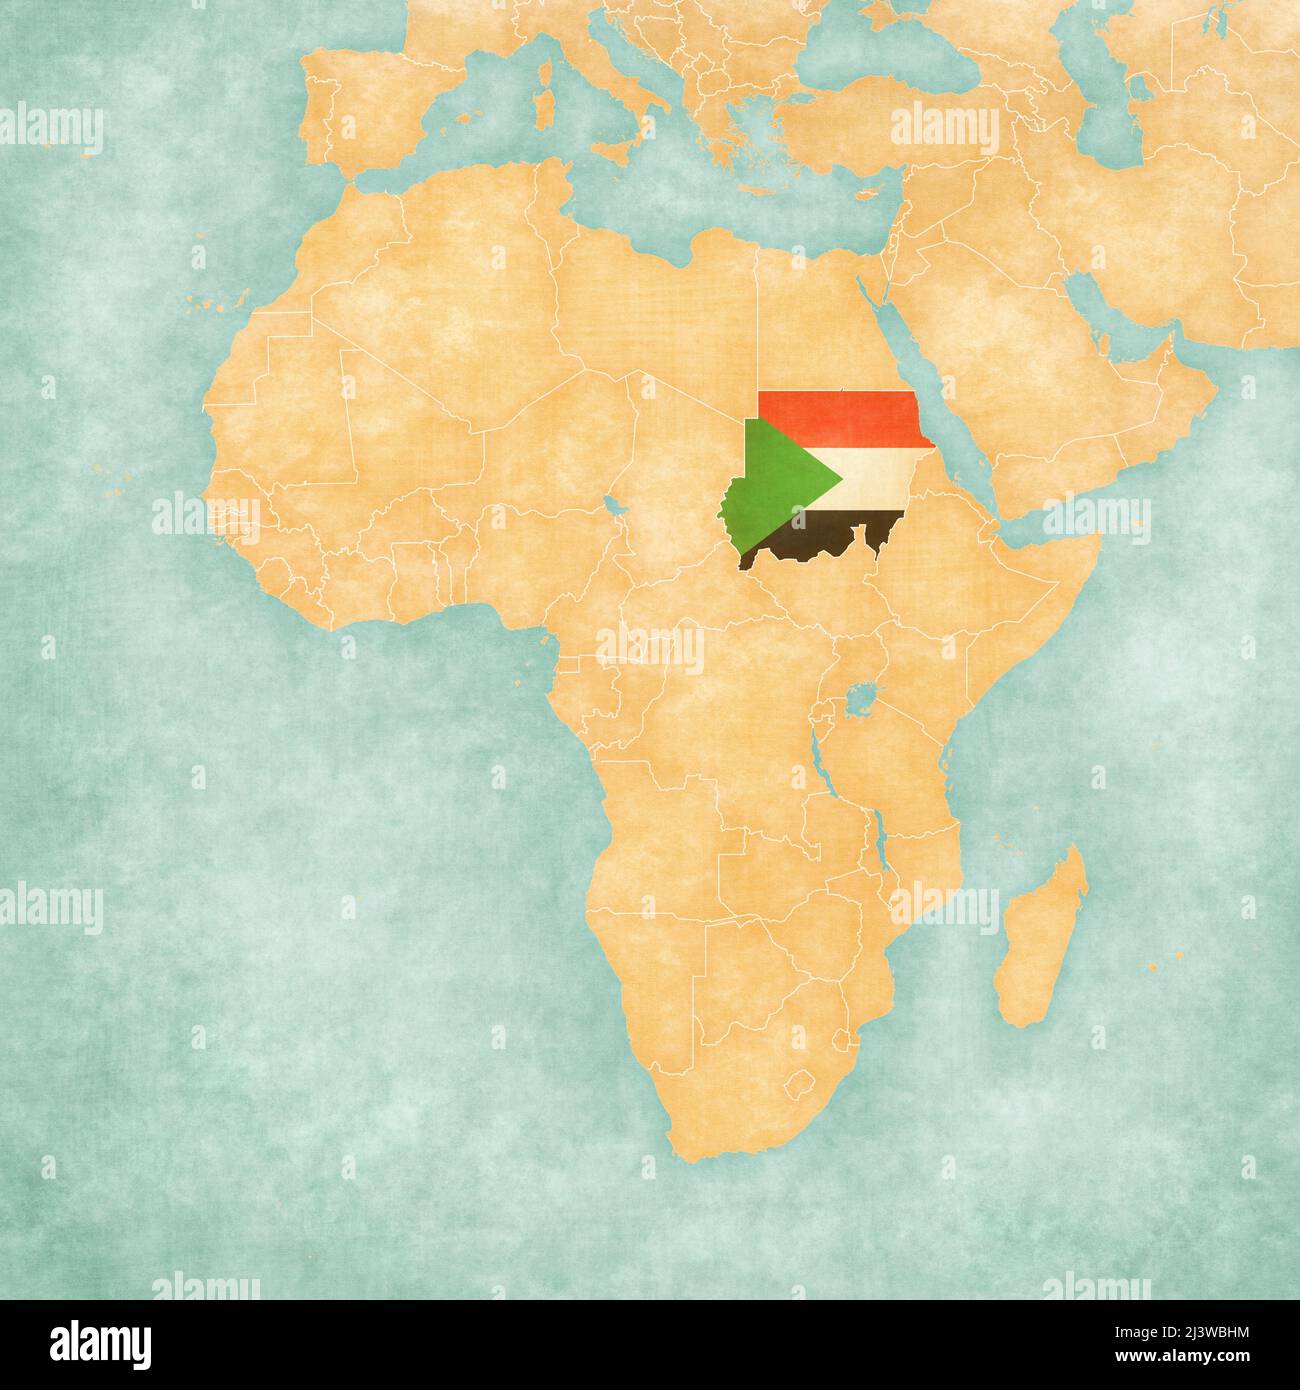 Sudan (Sudanese flag) on the map of Africa. The map is in soft grunge and vintage style, like watercolor painting on old paper. Stock Photo